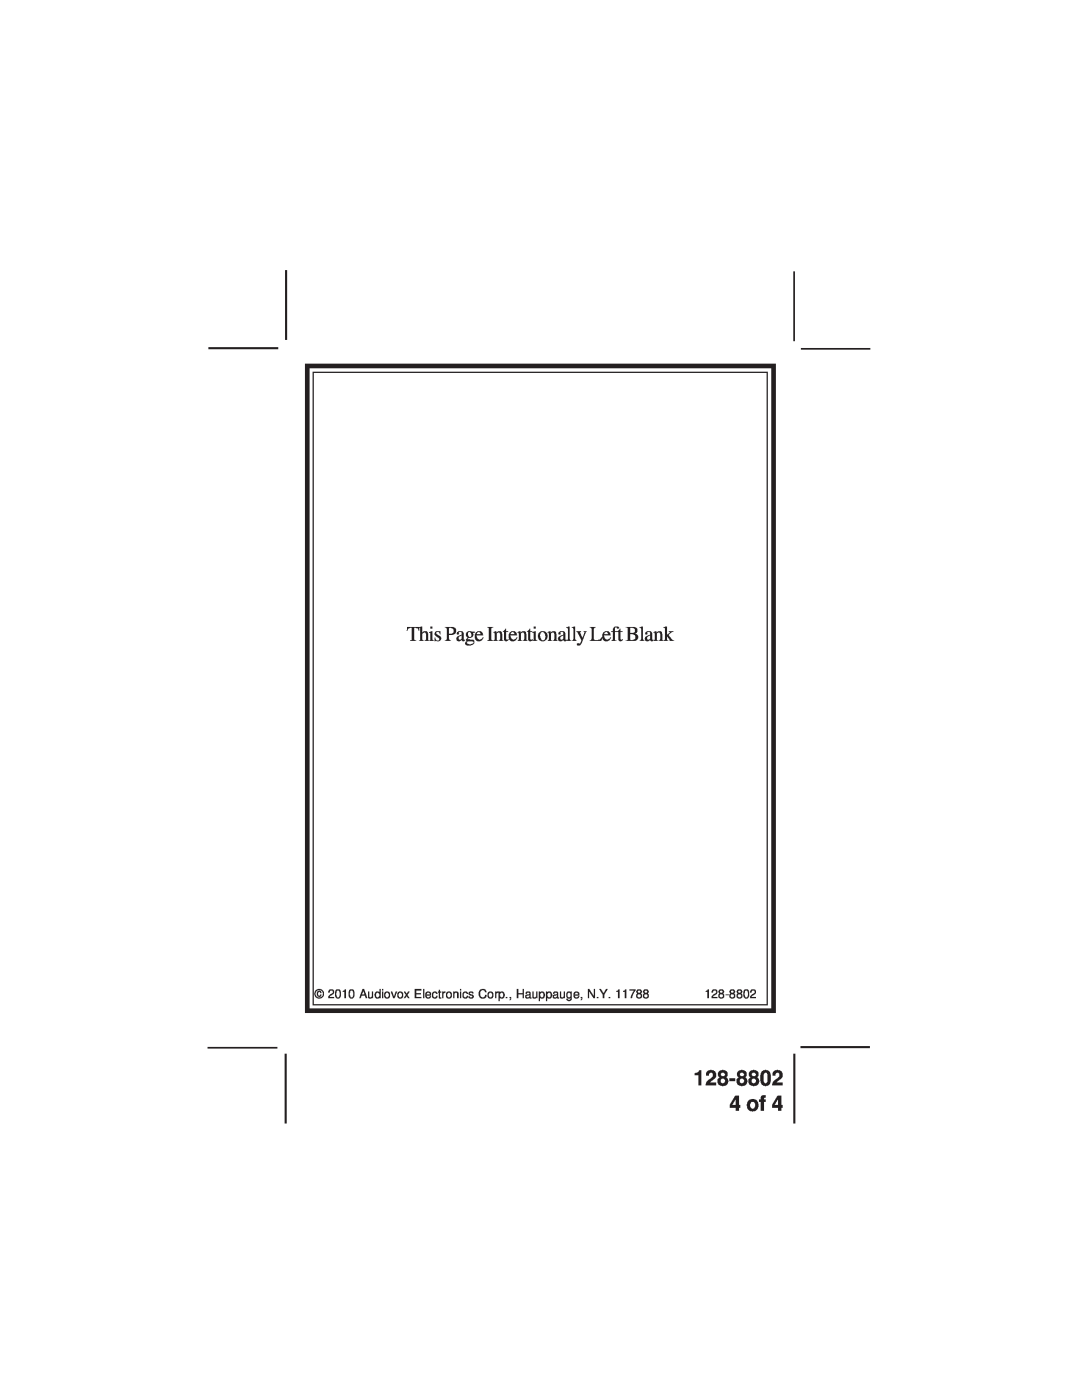 Audiovox 101BP manual 128-8802 4 of, This Page Intentionally Left Blank, Audiovox Electronics Corp., Hauppauge, N.Y 